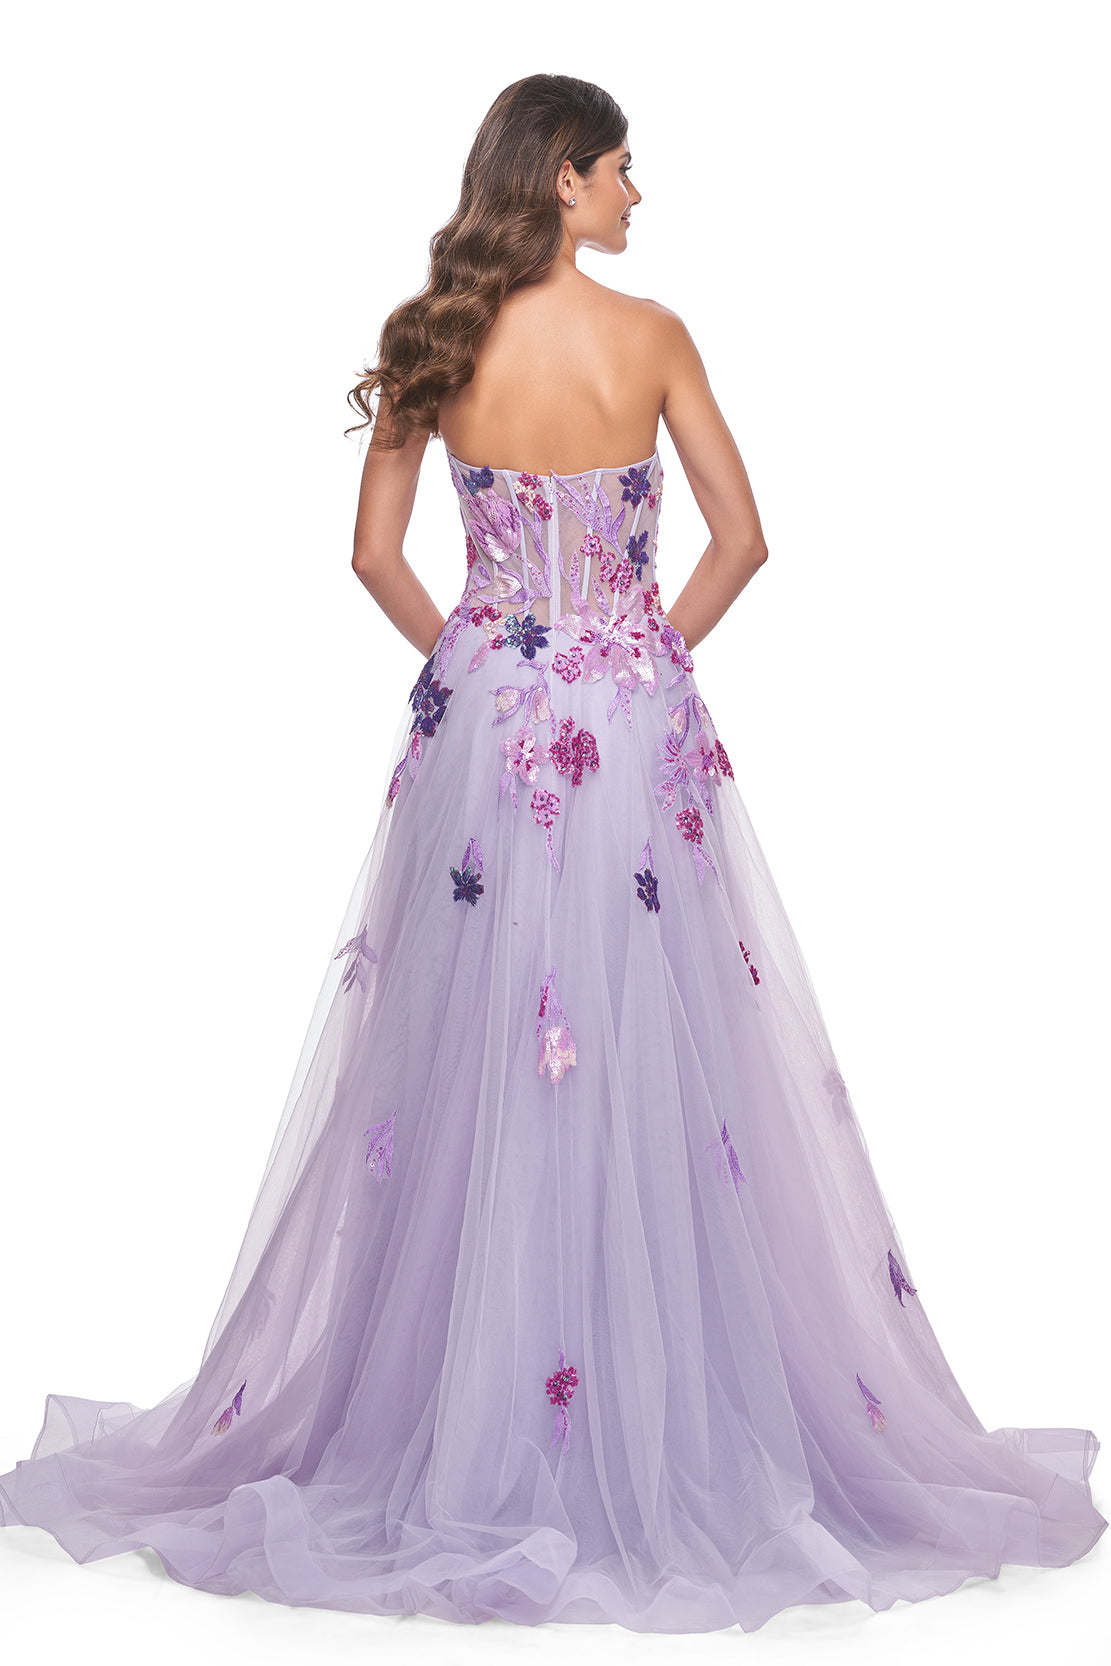 La Femme 32156 Strapless A-Line Tulle Prom and Quinceañera Dress - A captivating A-line tulle dress featuring a strapless design and floral multicolor sequin lace applique details, perfect for making a statement at prom or quinceañera celebrations. The model is wearing the dress in the color Lavender. This is view of the back of the dress.